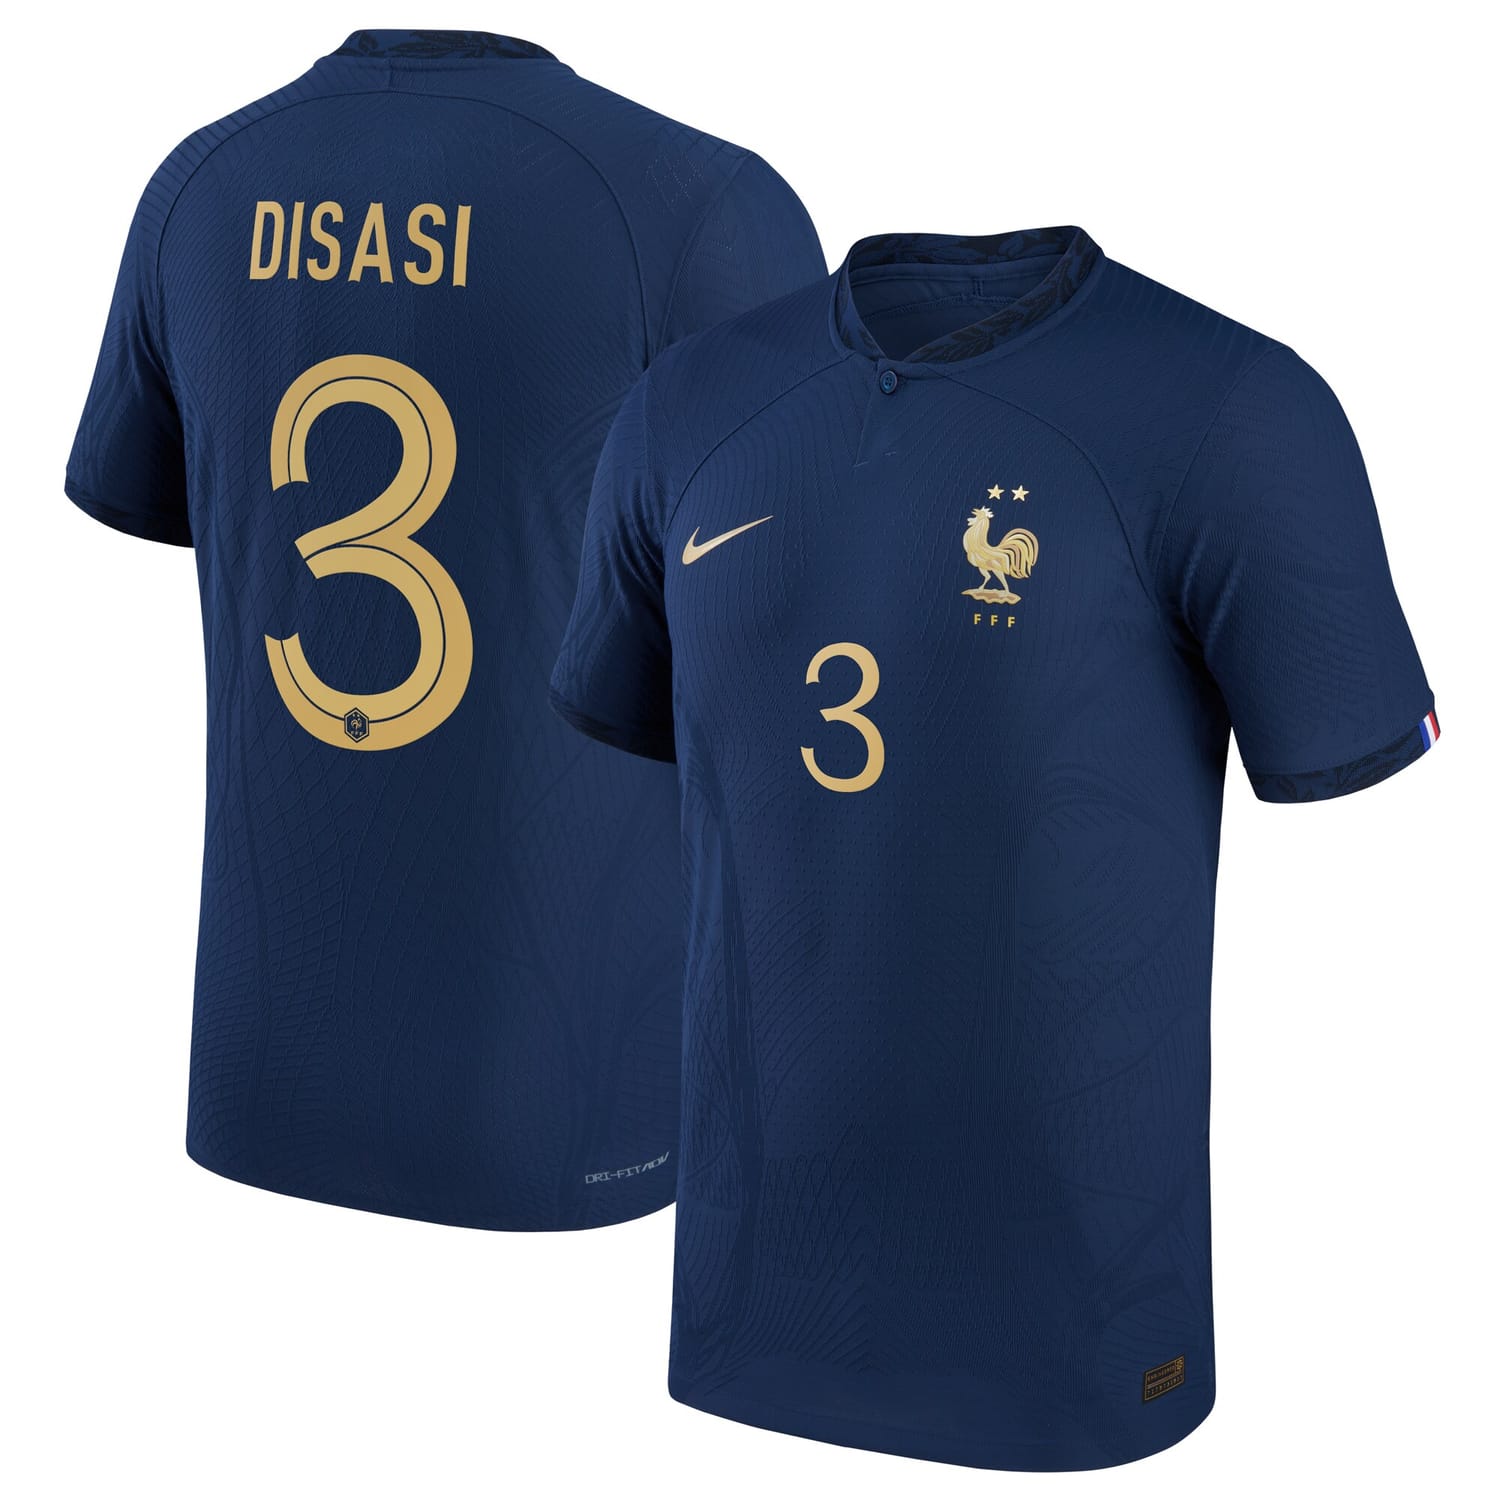 France National Team Home Authentic Jersey Shirt 2022 player Axel Disasi 3 printing for Men